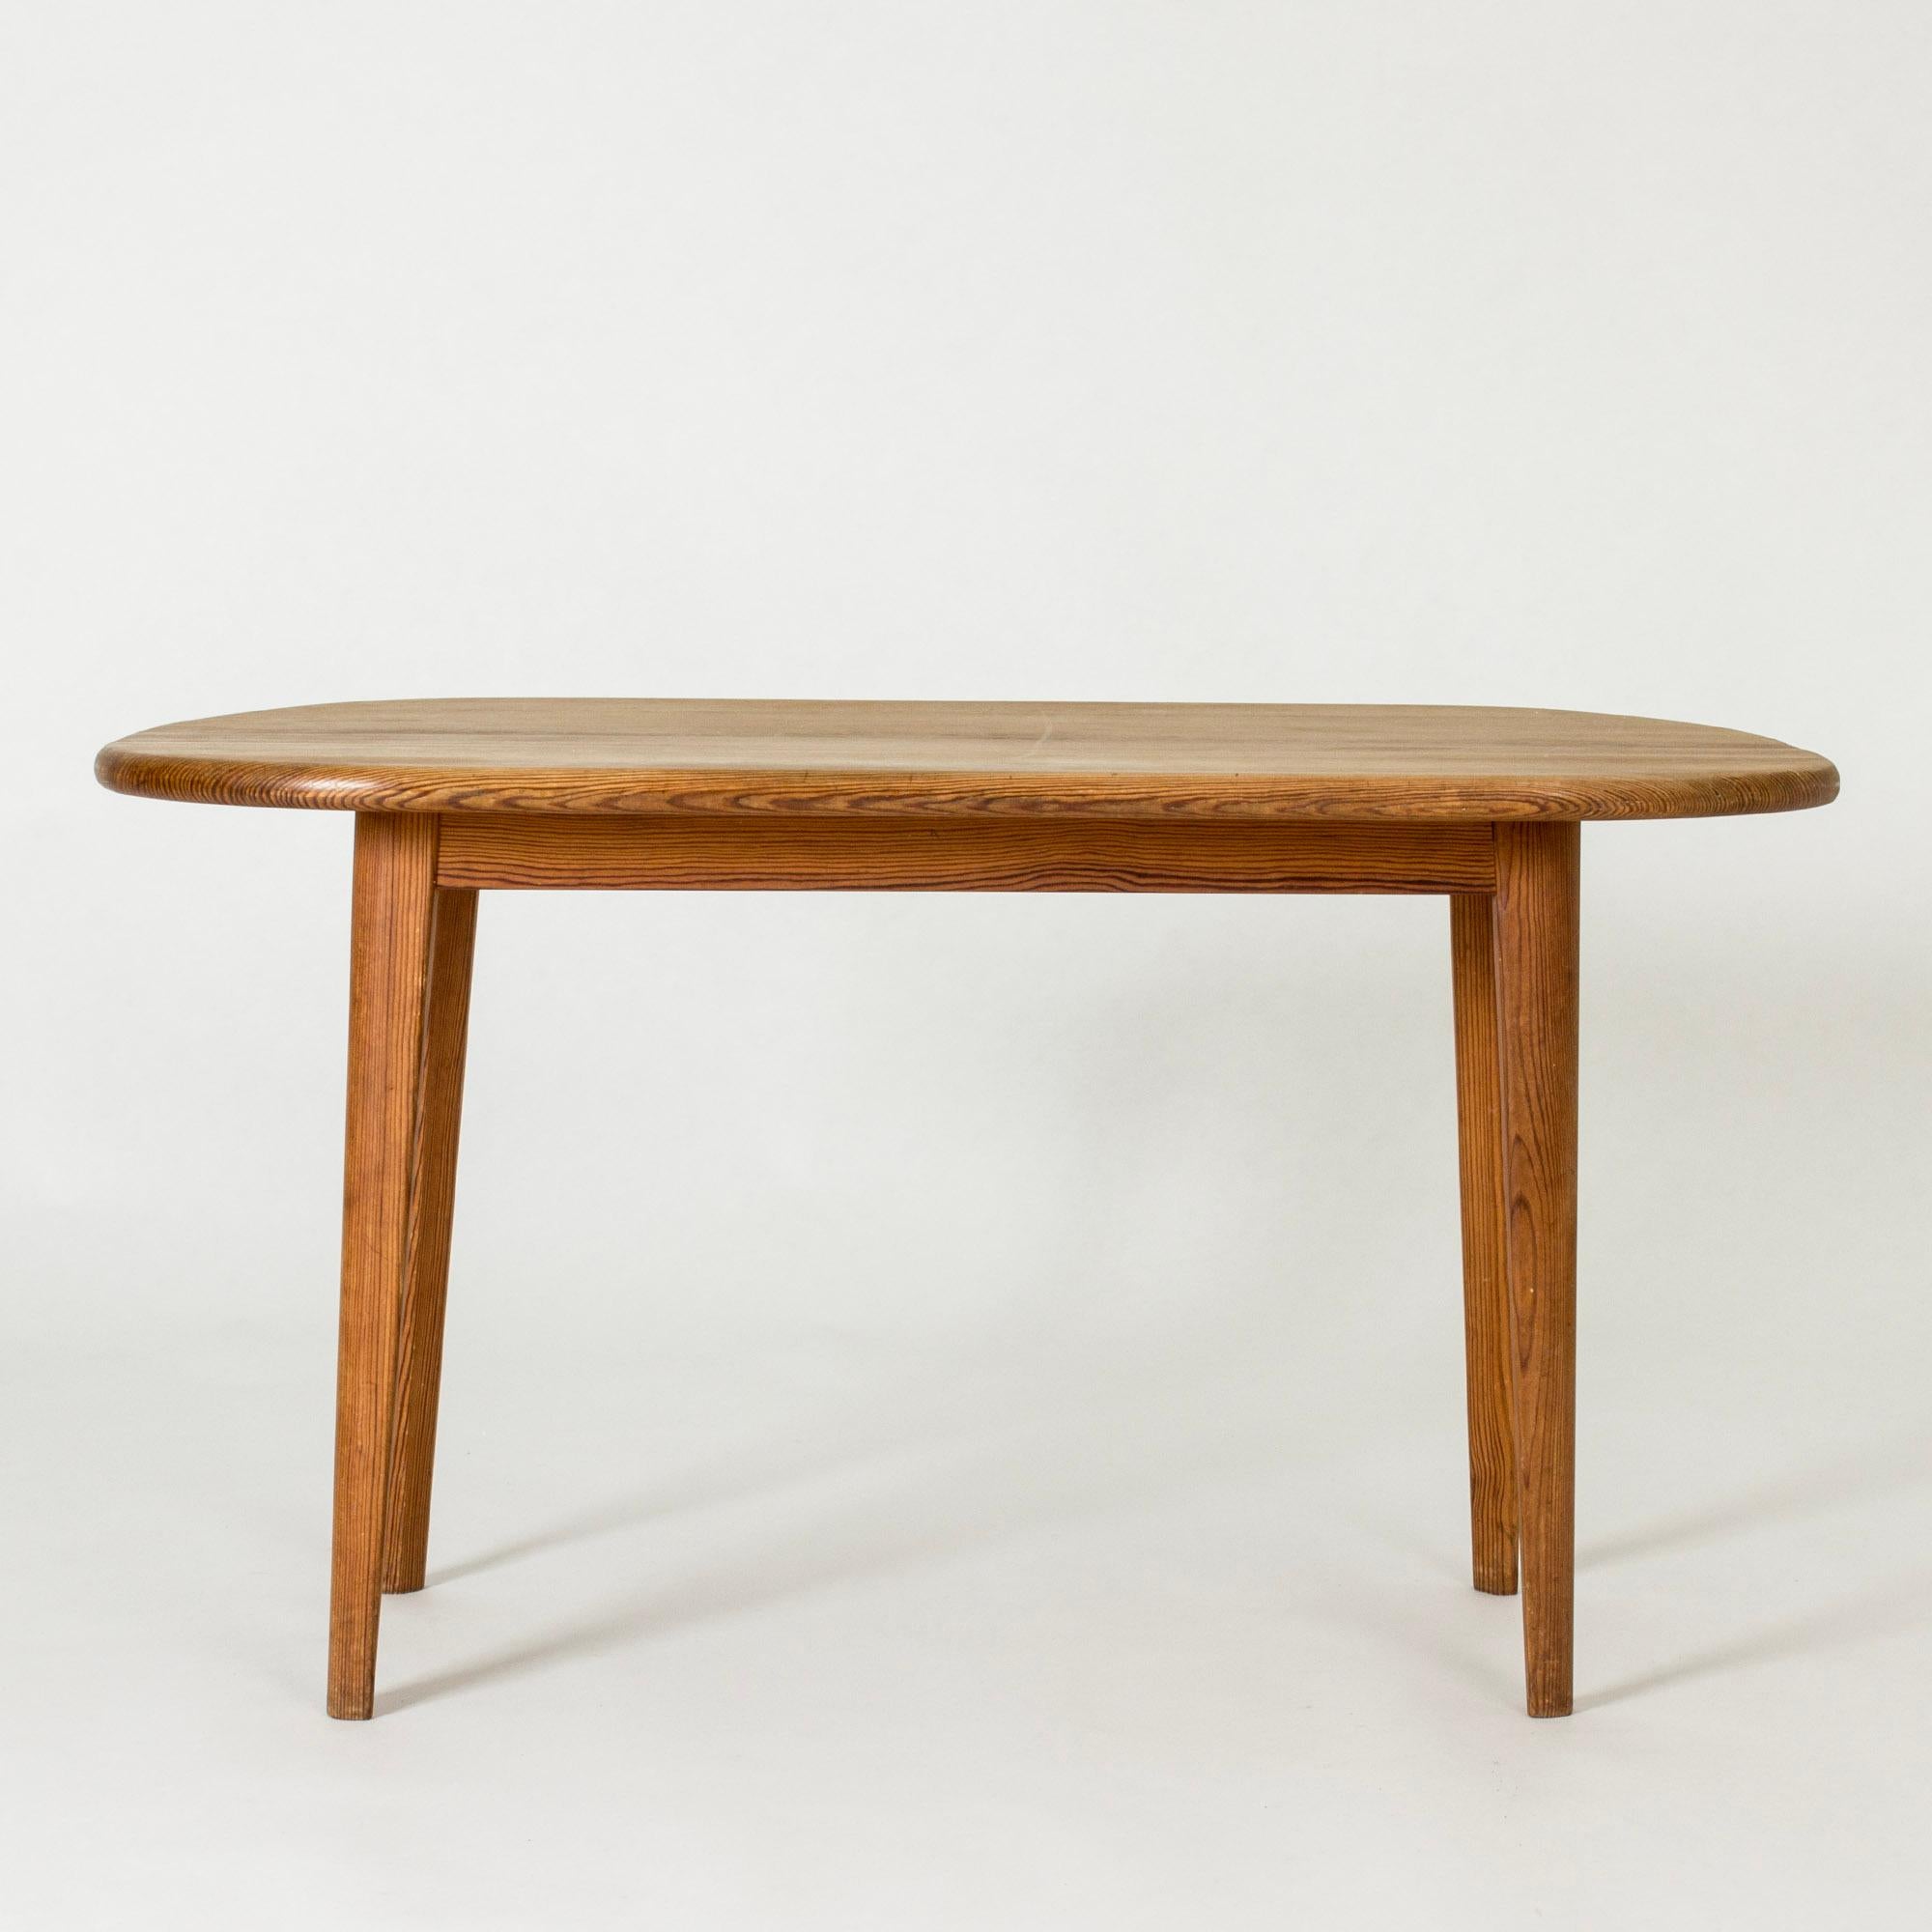 Beautiful occasional table by Carl Malmsten, made from pine with lovely woodgrain. Smooth, rounded forms.